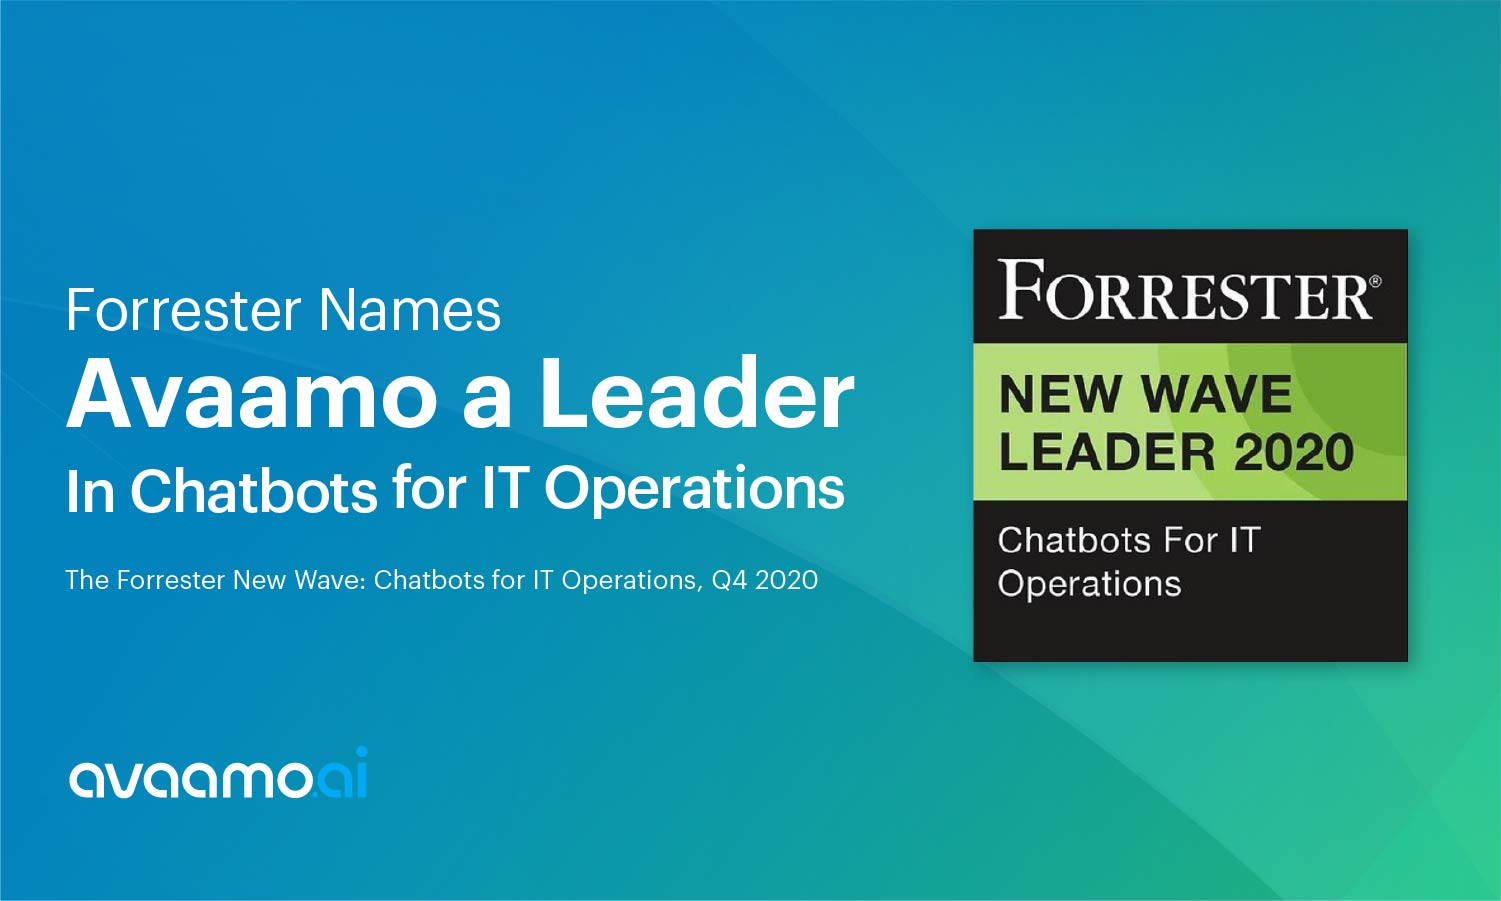 Forrester names Avaamo Leader in AI chatbots for IT operations